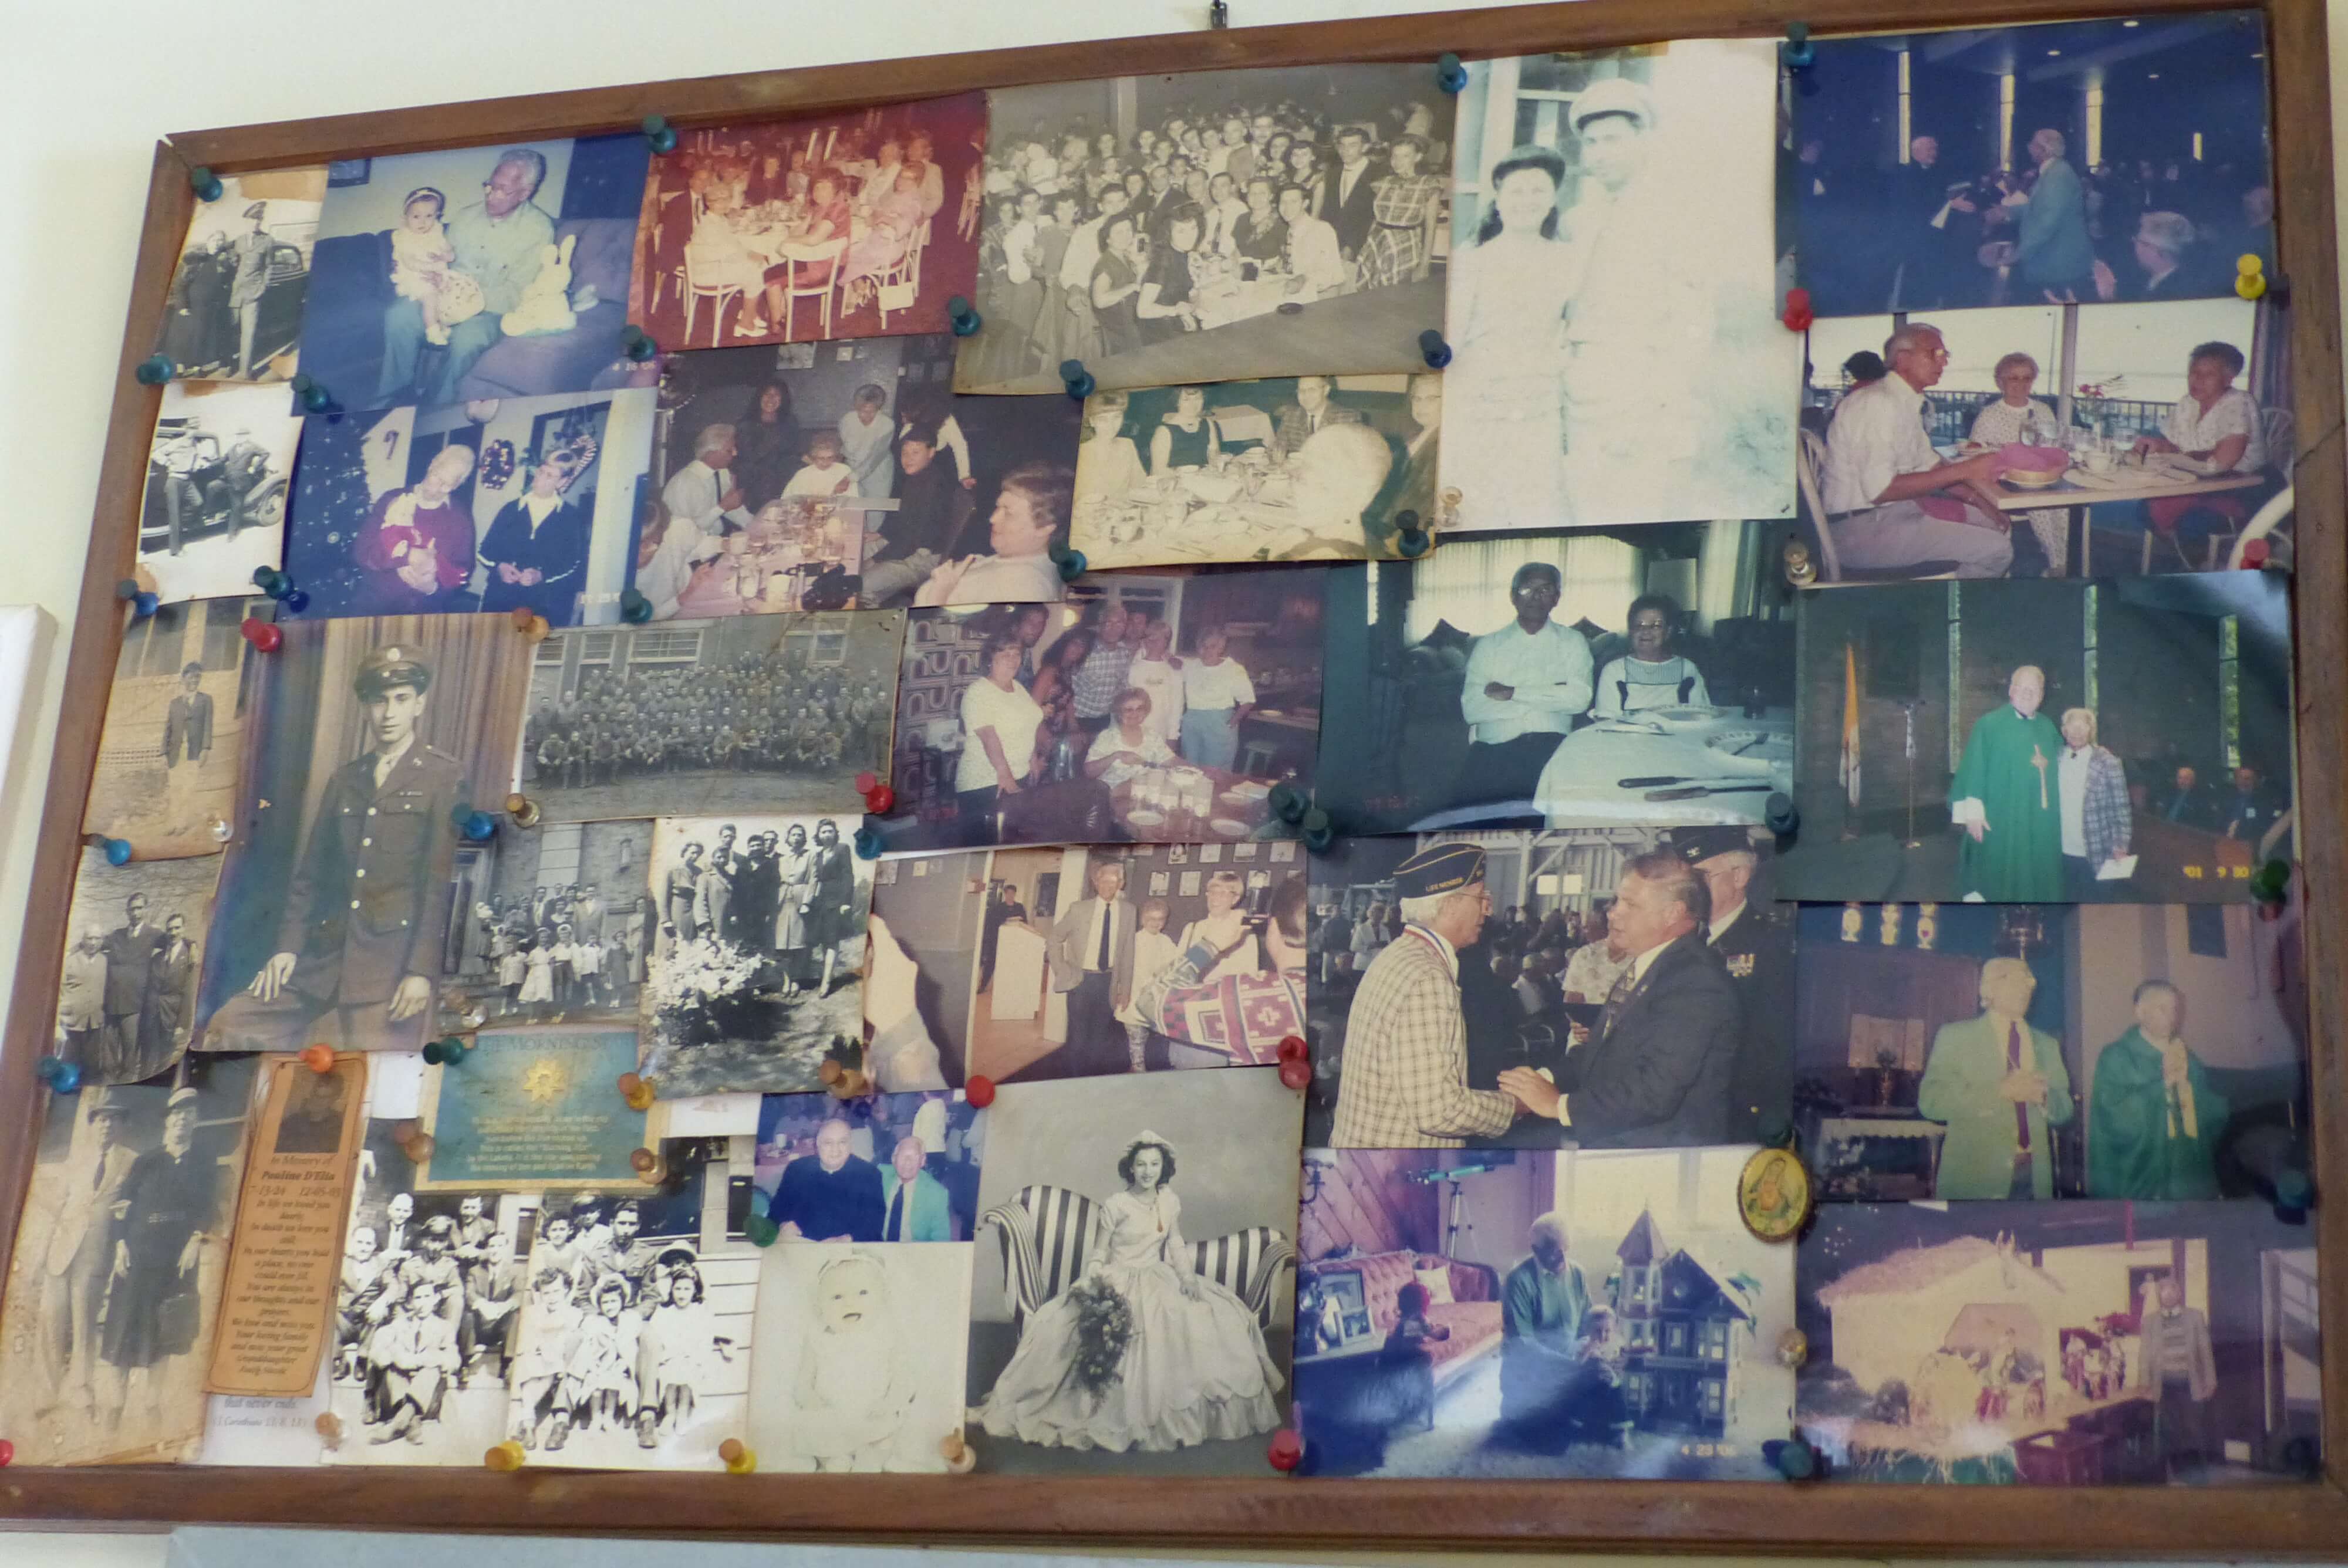 A photo collage in D’Elia’s garage features photos of family members and his wife